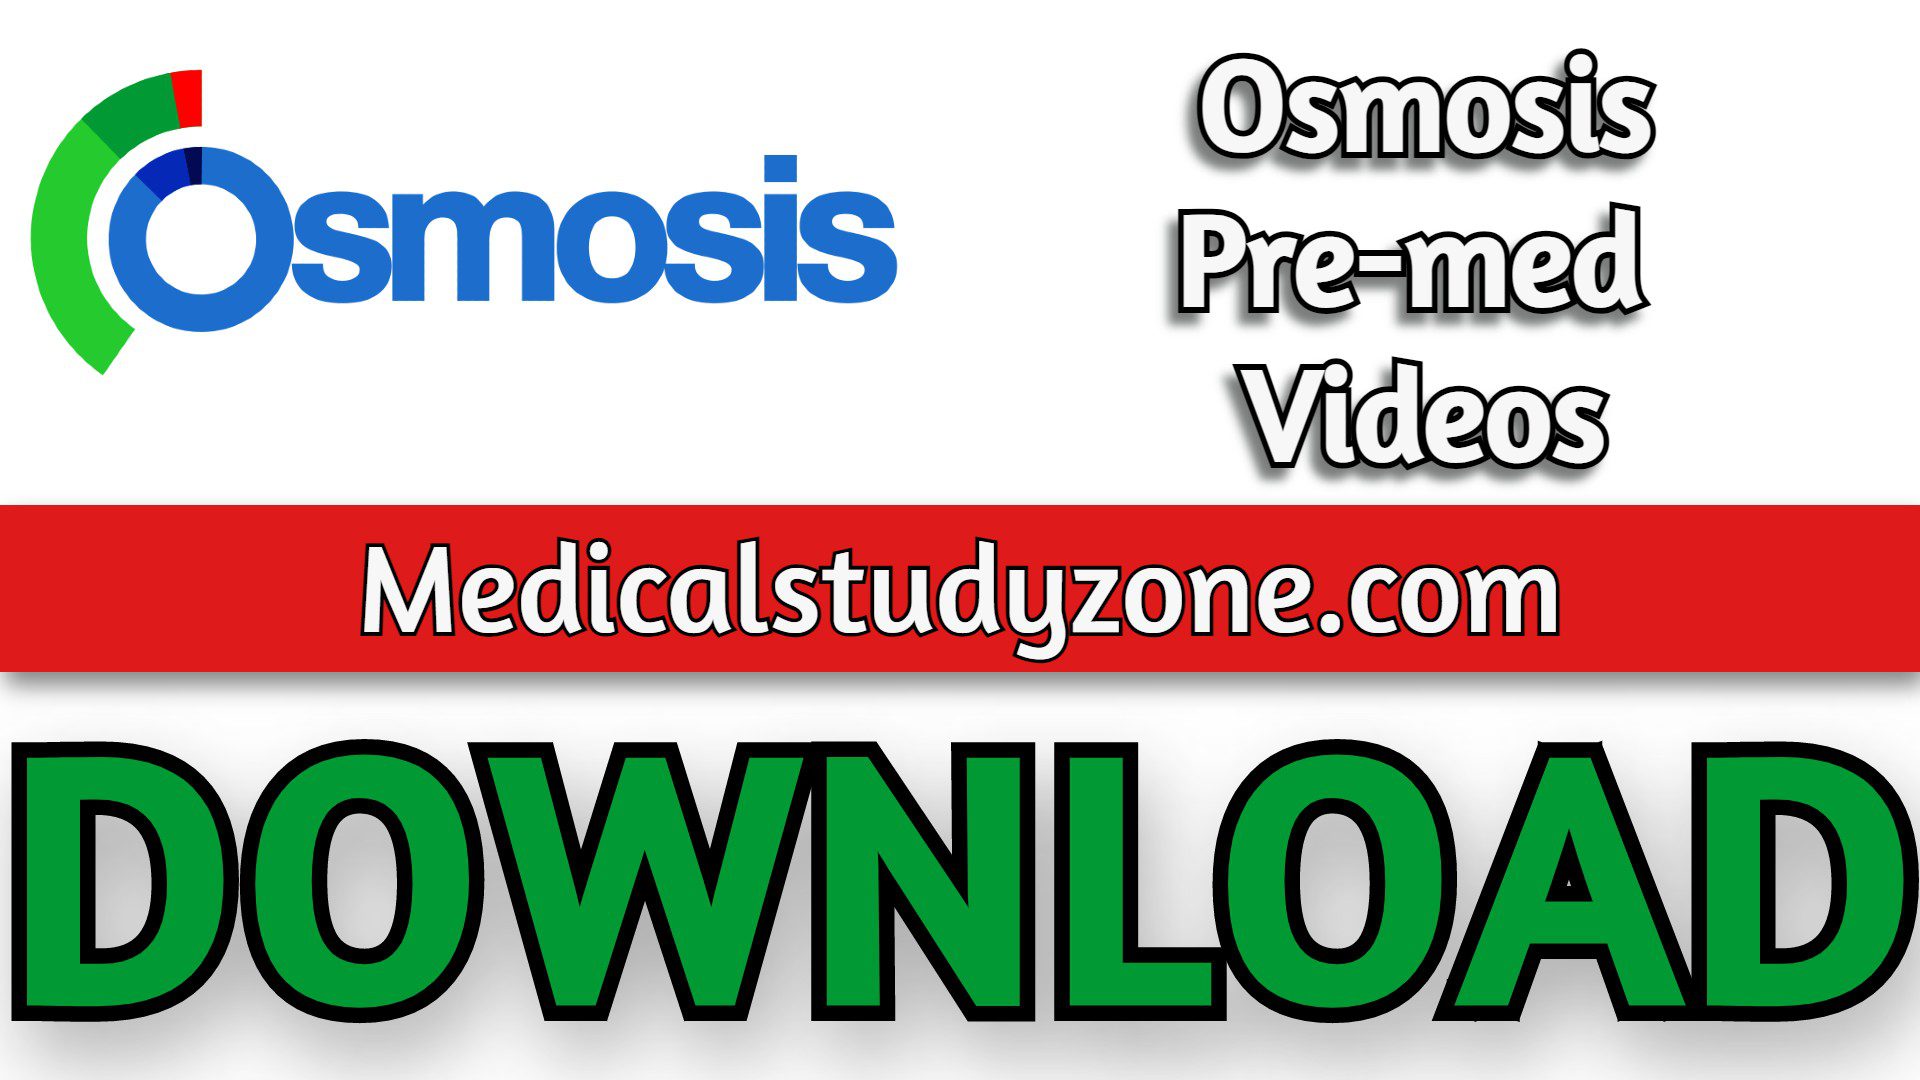 Osmosis Pre-med Videos 2023 Free Download